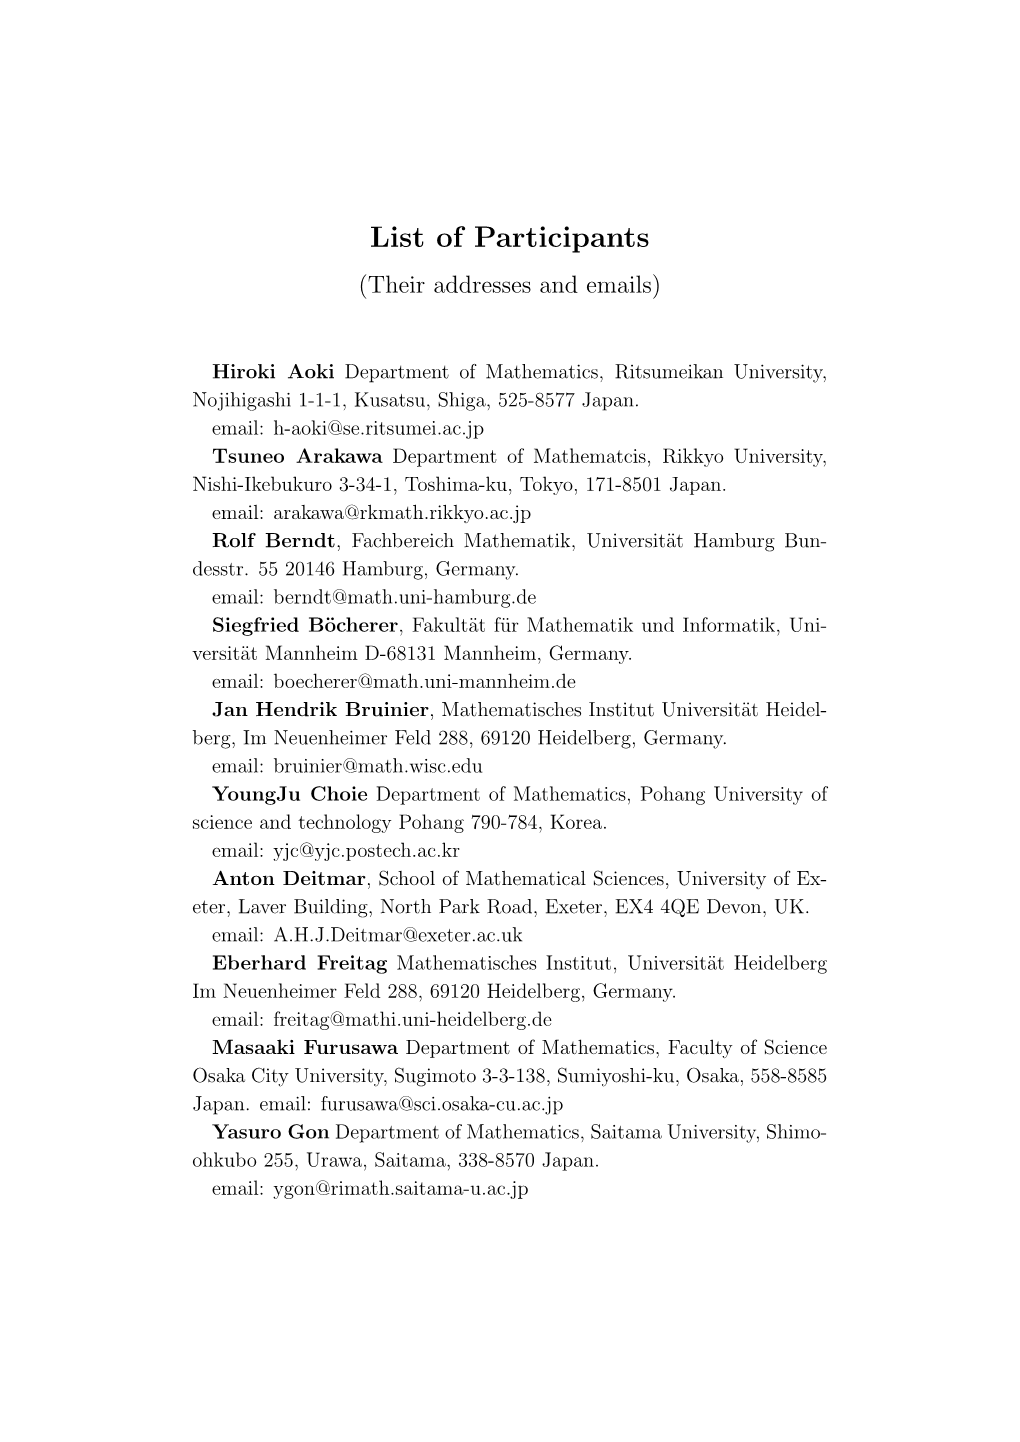 List of Participants (Their Addresses and Emails)